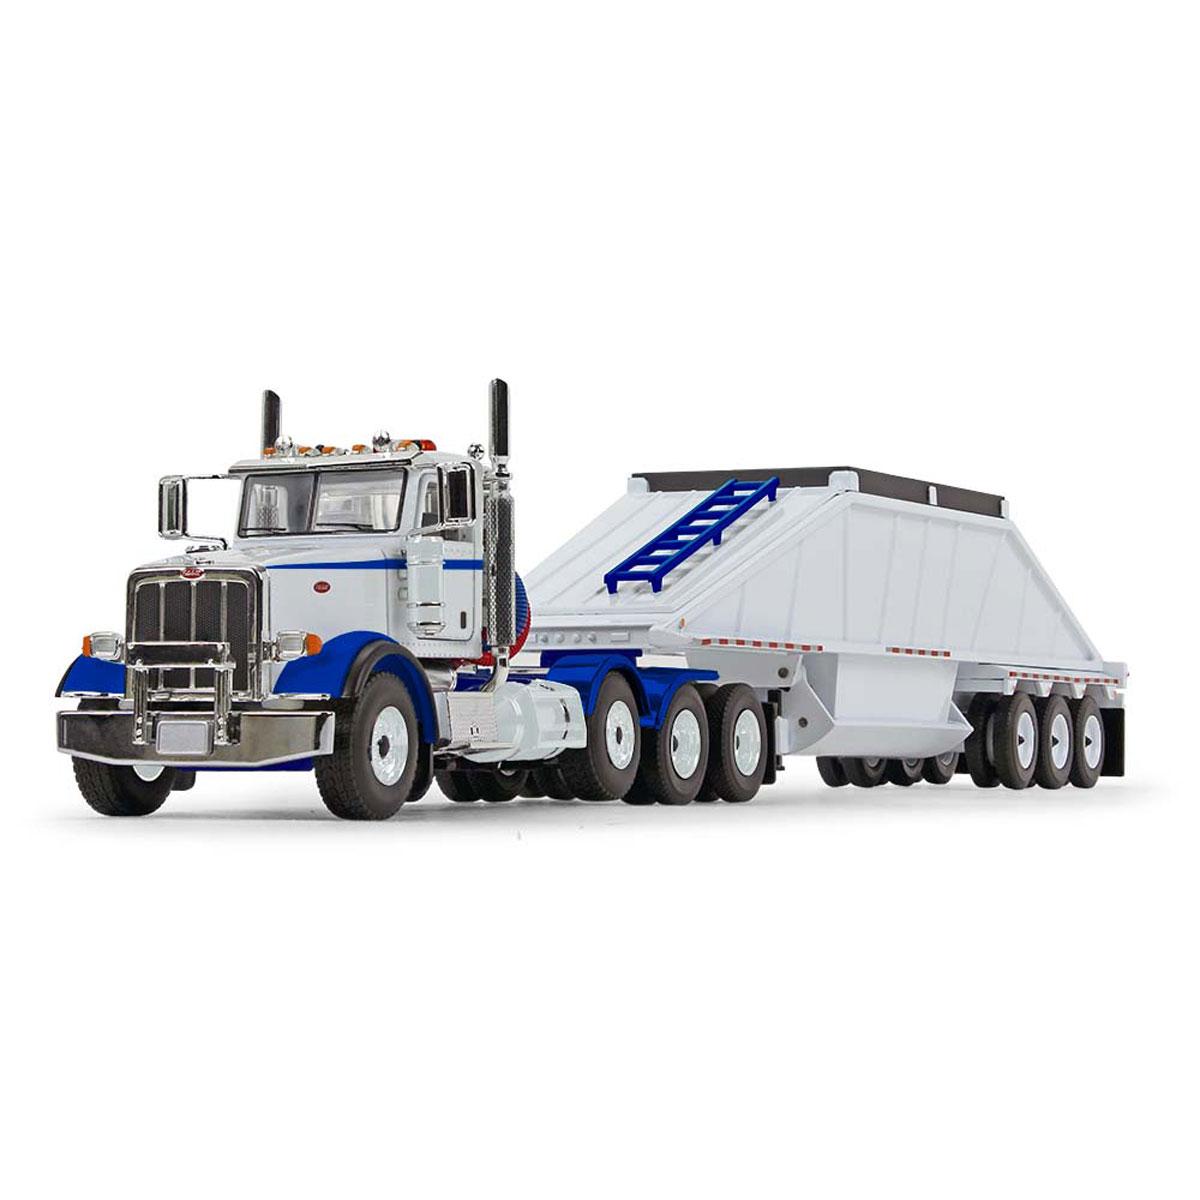 Product Image - First Gear 50-3481 Peterbilt Model 367 Day Cab 8x4 Truck Bottom Dump Trailer White / Blue Scale 1:50